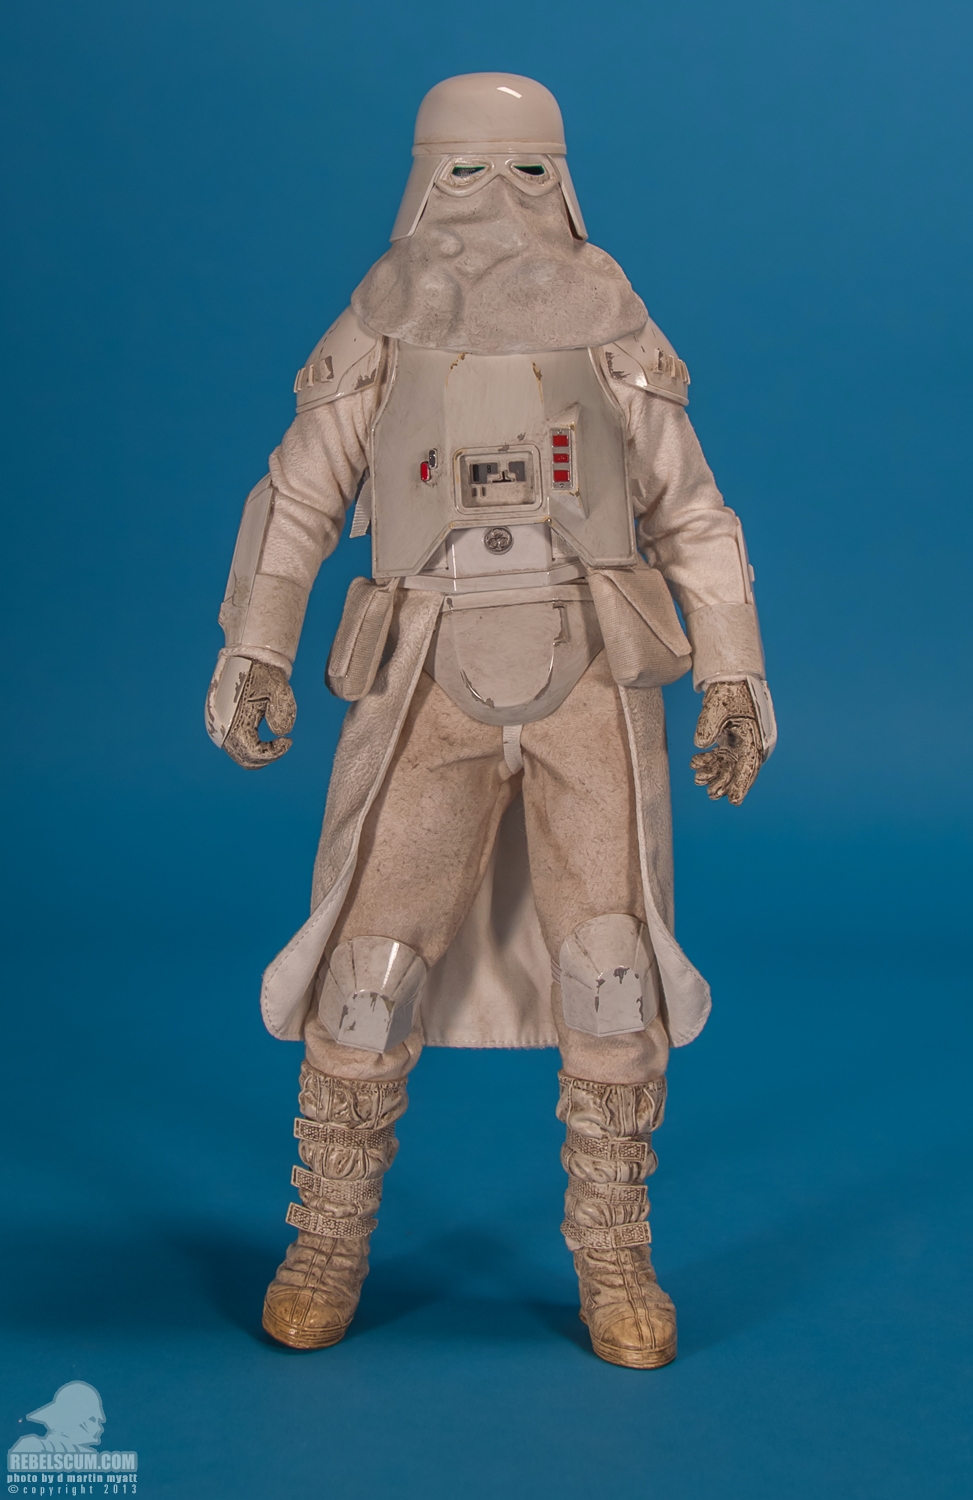 Snowtrooper_Militaries_Of_Star_Wars_Sideshow_Collectibles-01.jpg